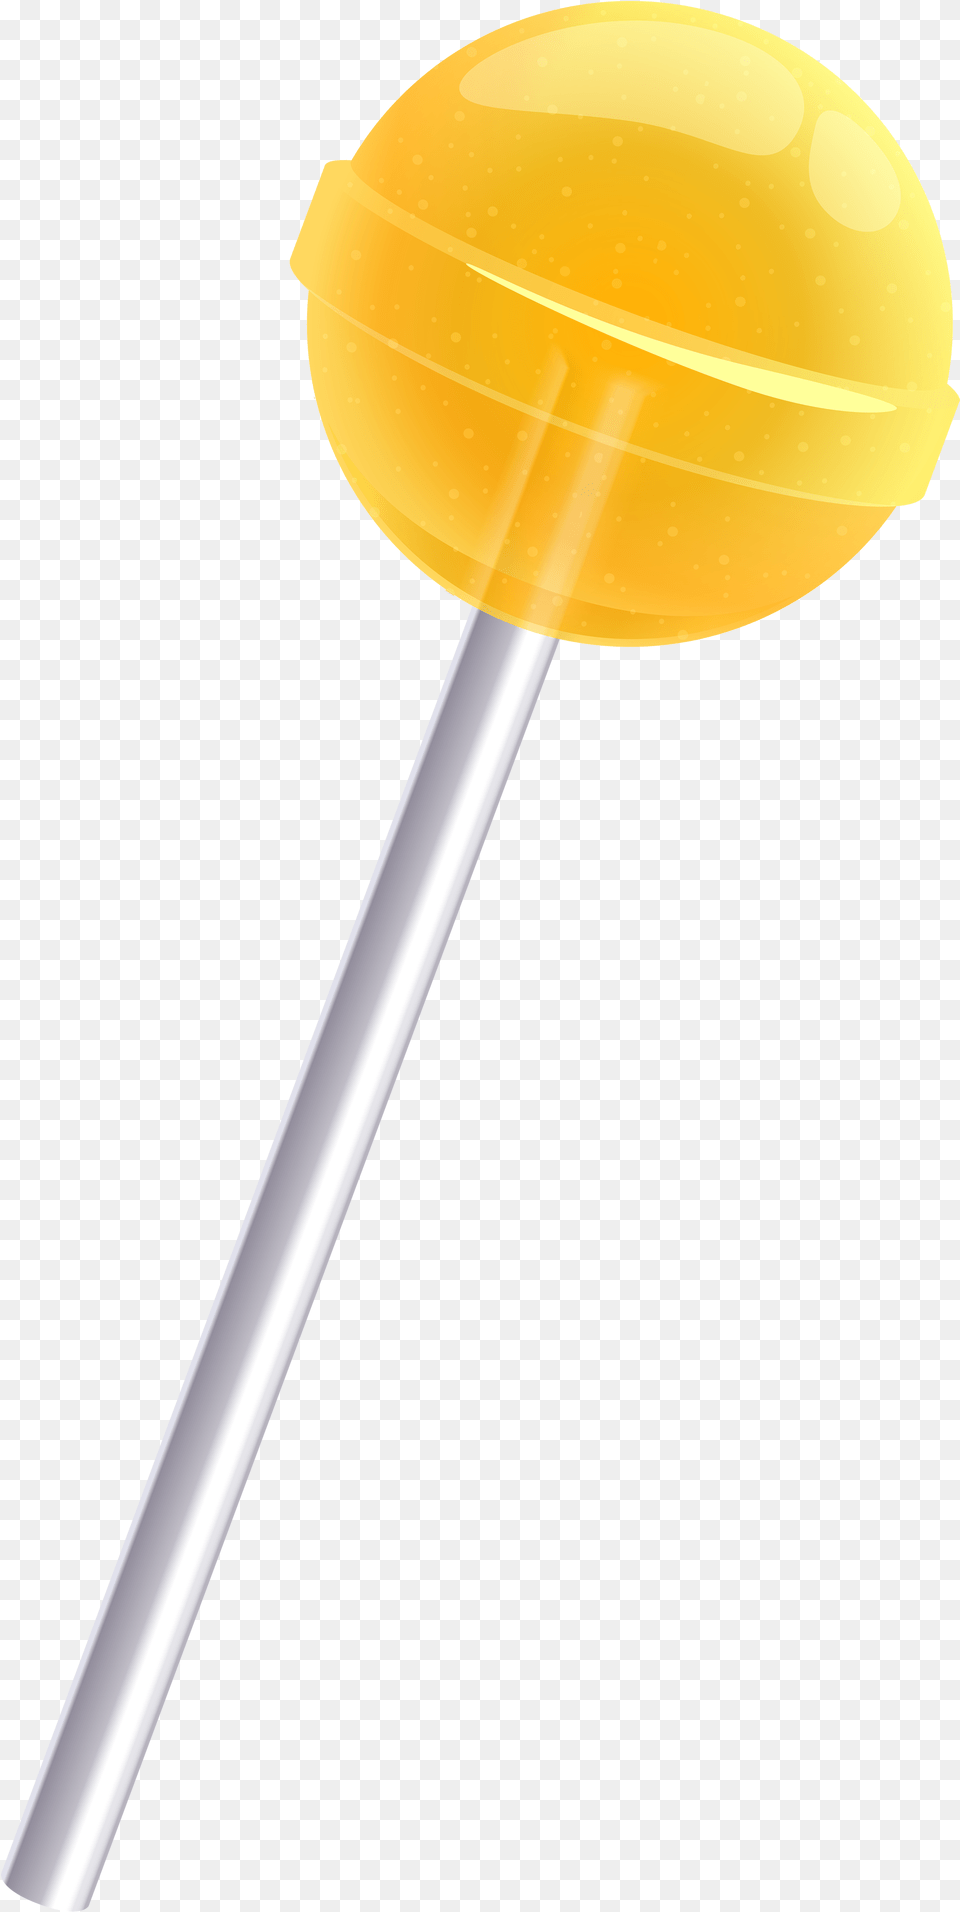 Lollipop Image Lollipop, Candy, Food, Sweets Free Png Download